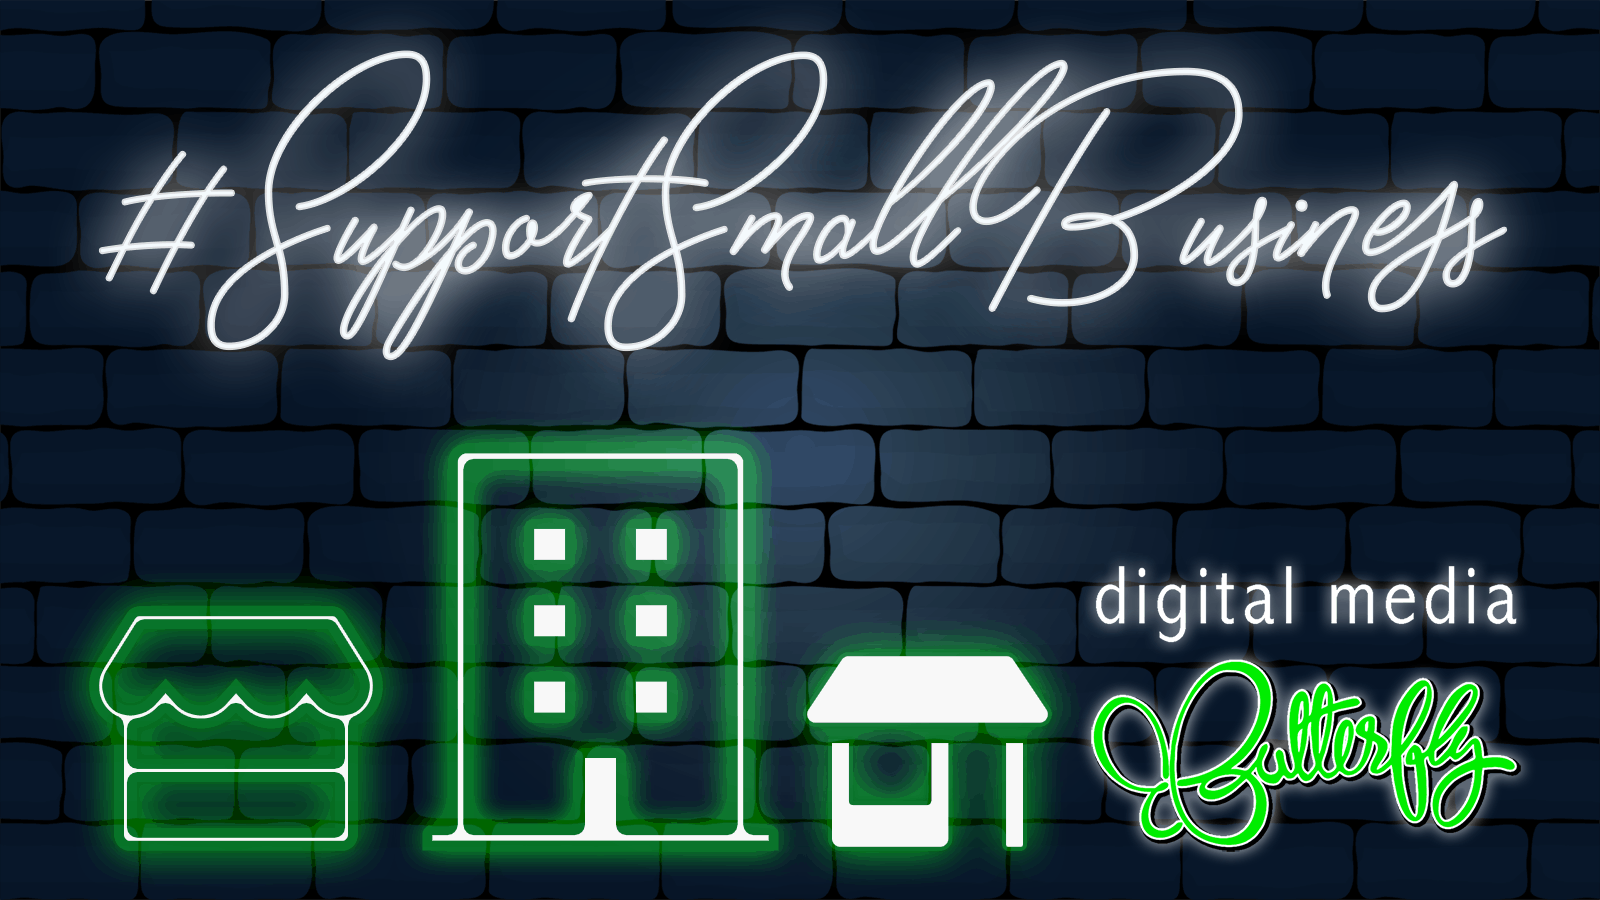 Digital-Media-Butterfly-Support-Small-Business